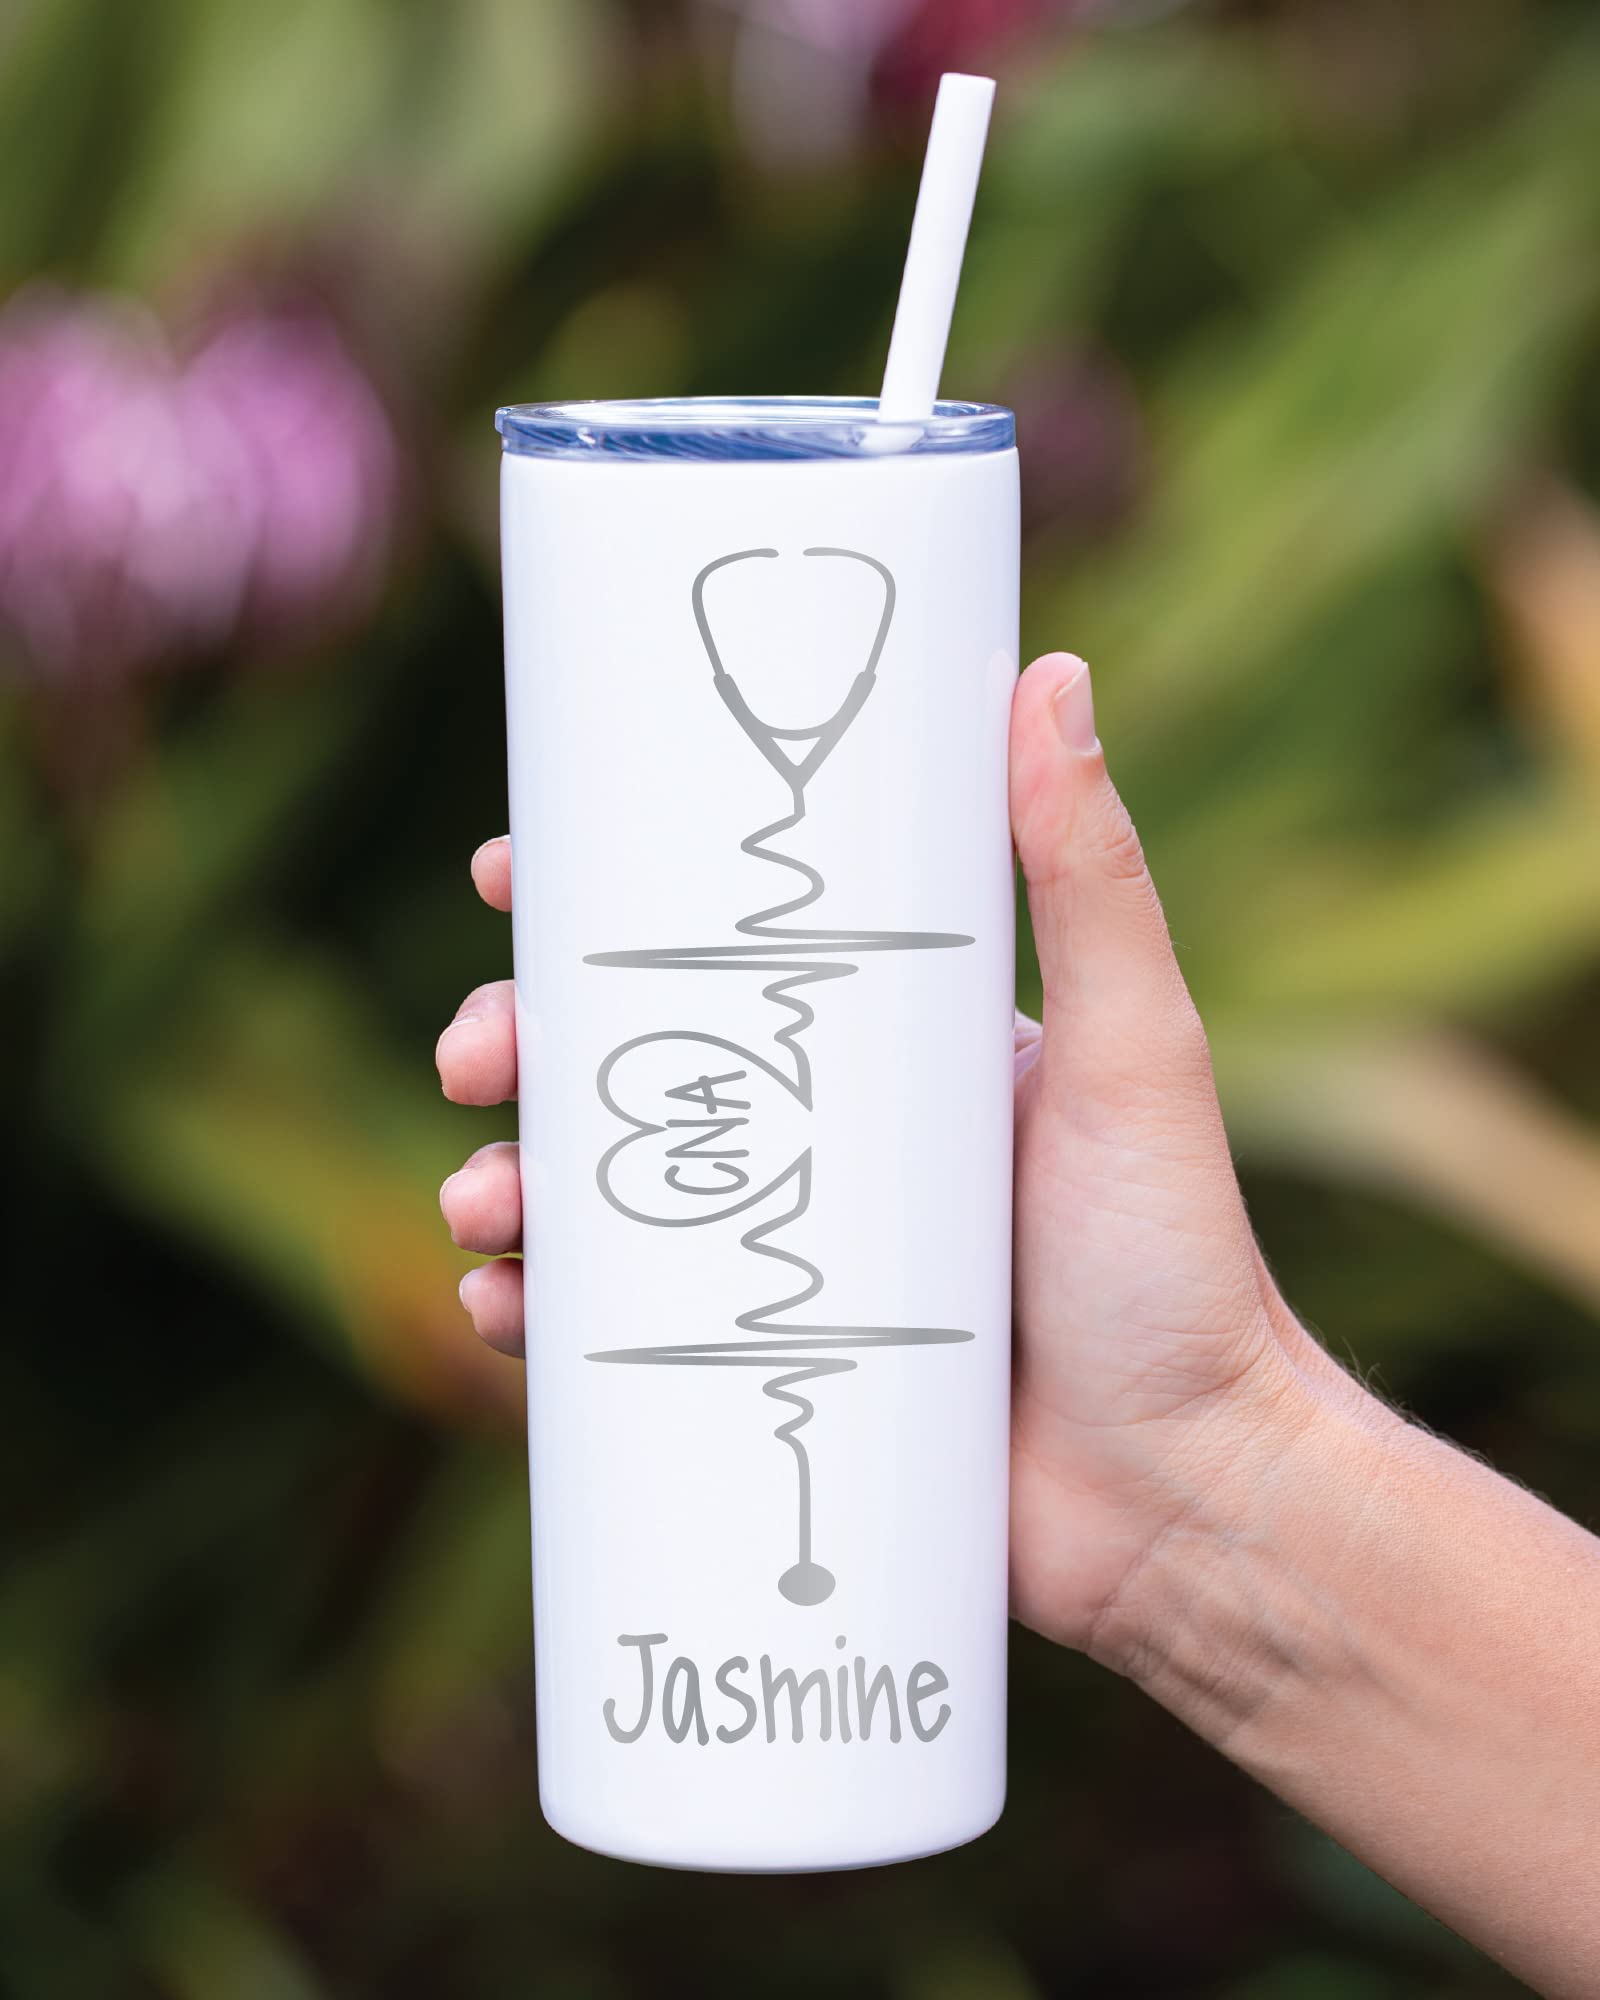 Heartbeat Nurse's Personalized Laser Engraved 20 oz Stainless Steel Skinny Tumbler with Custom Stethoscope by Avito - Includes Straw and Lid - Nurse RN, CNA, PA - Nurse Gift